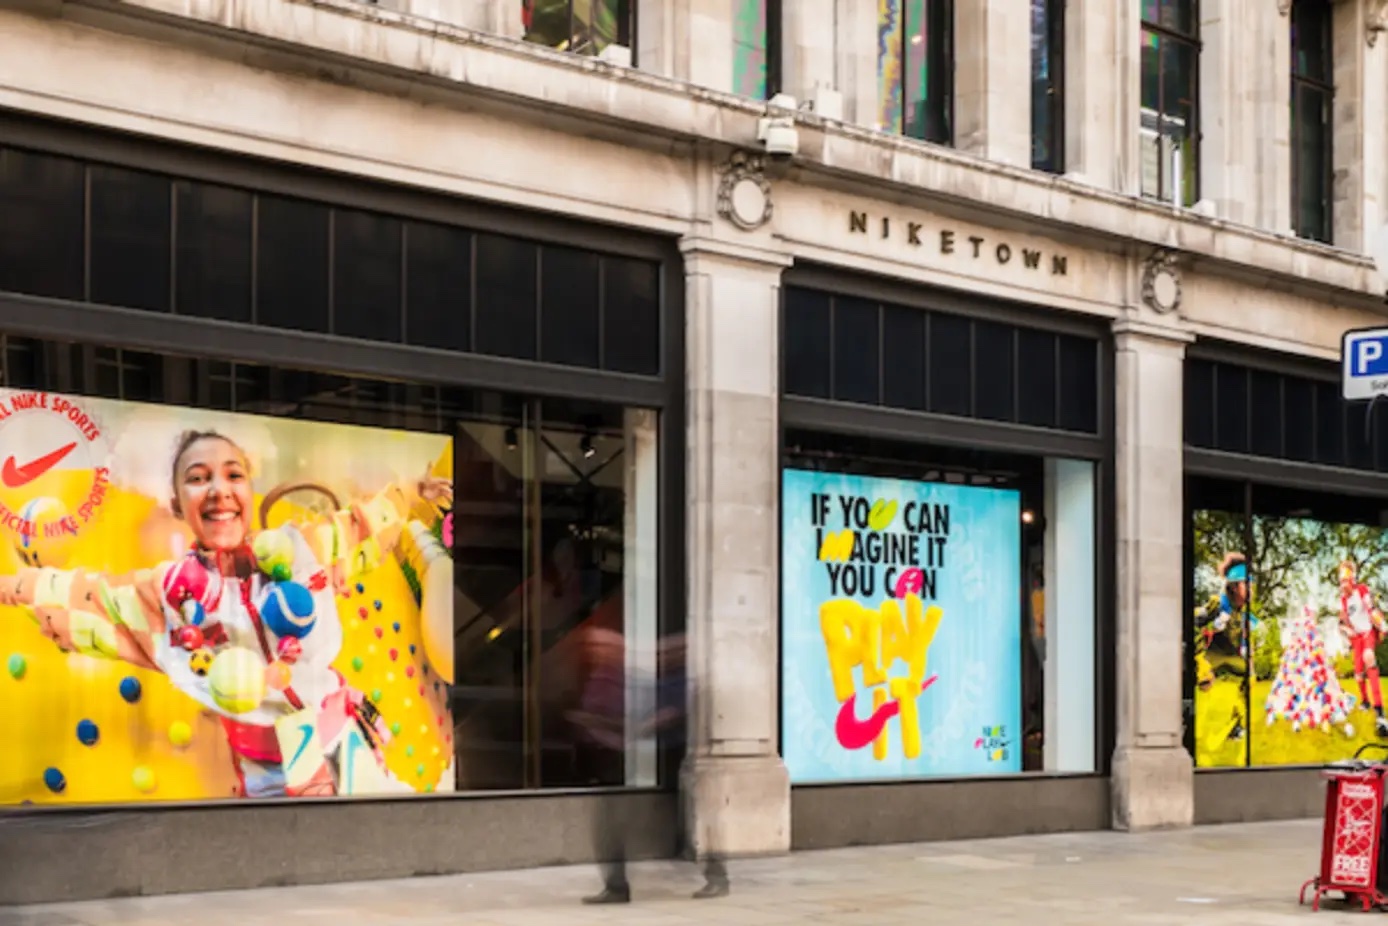 Niketown London's PLAYlab gets children involved experiential sports - Retail Focus - Retail Design